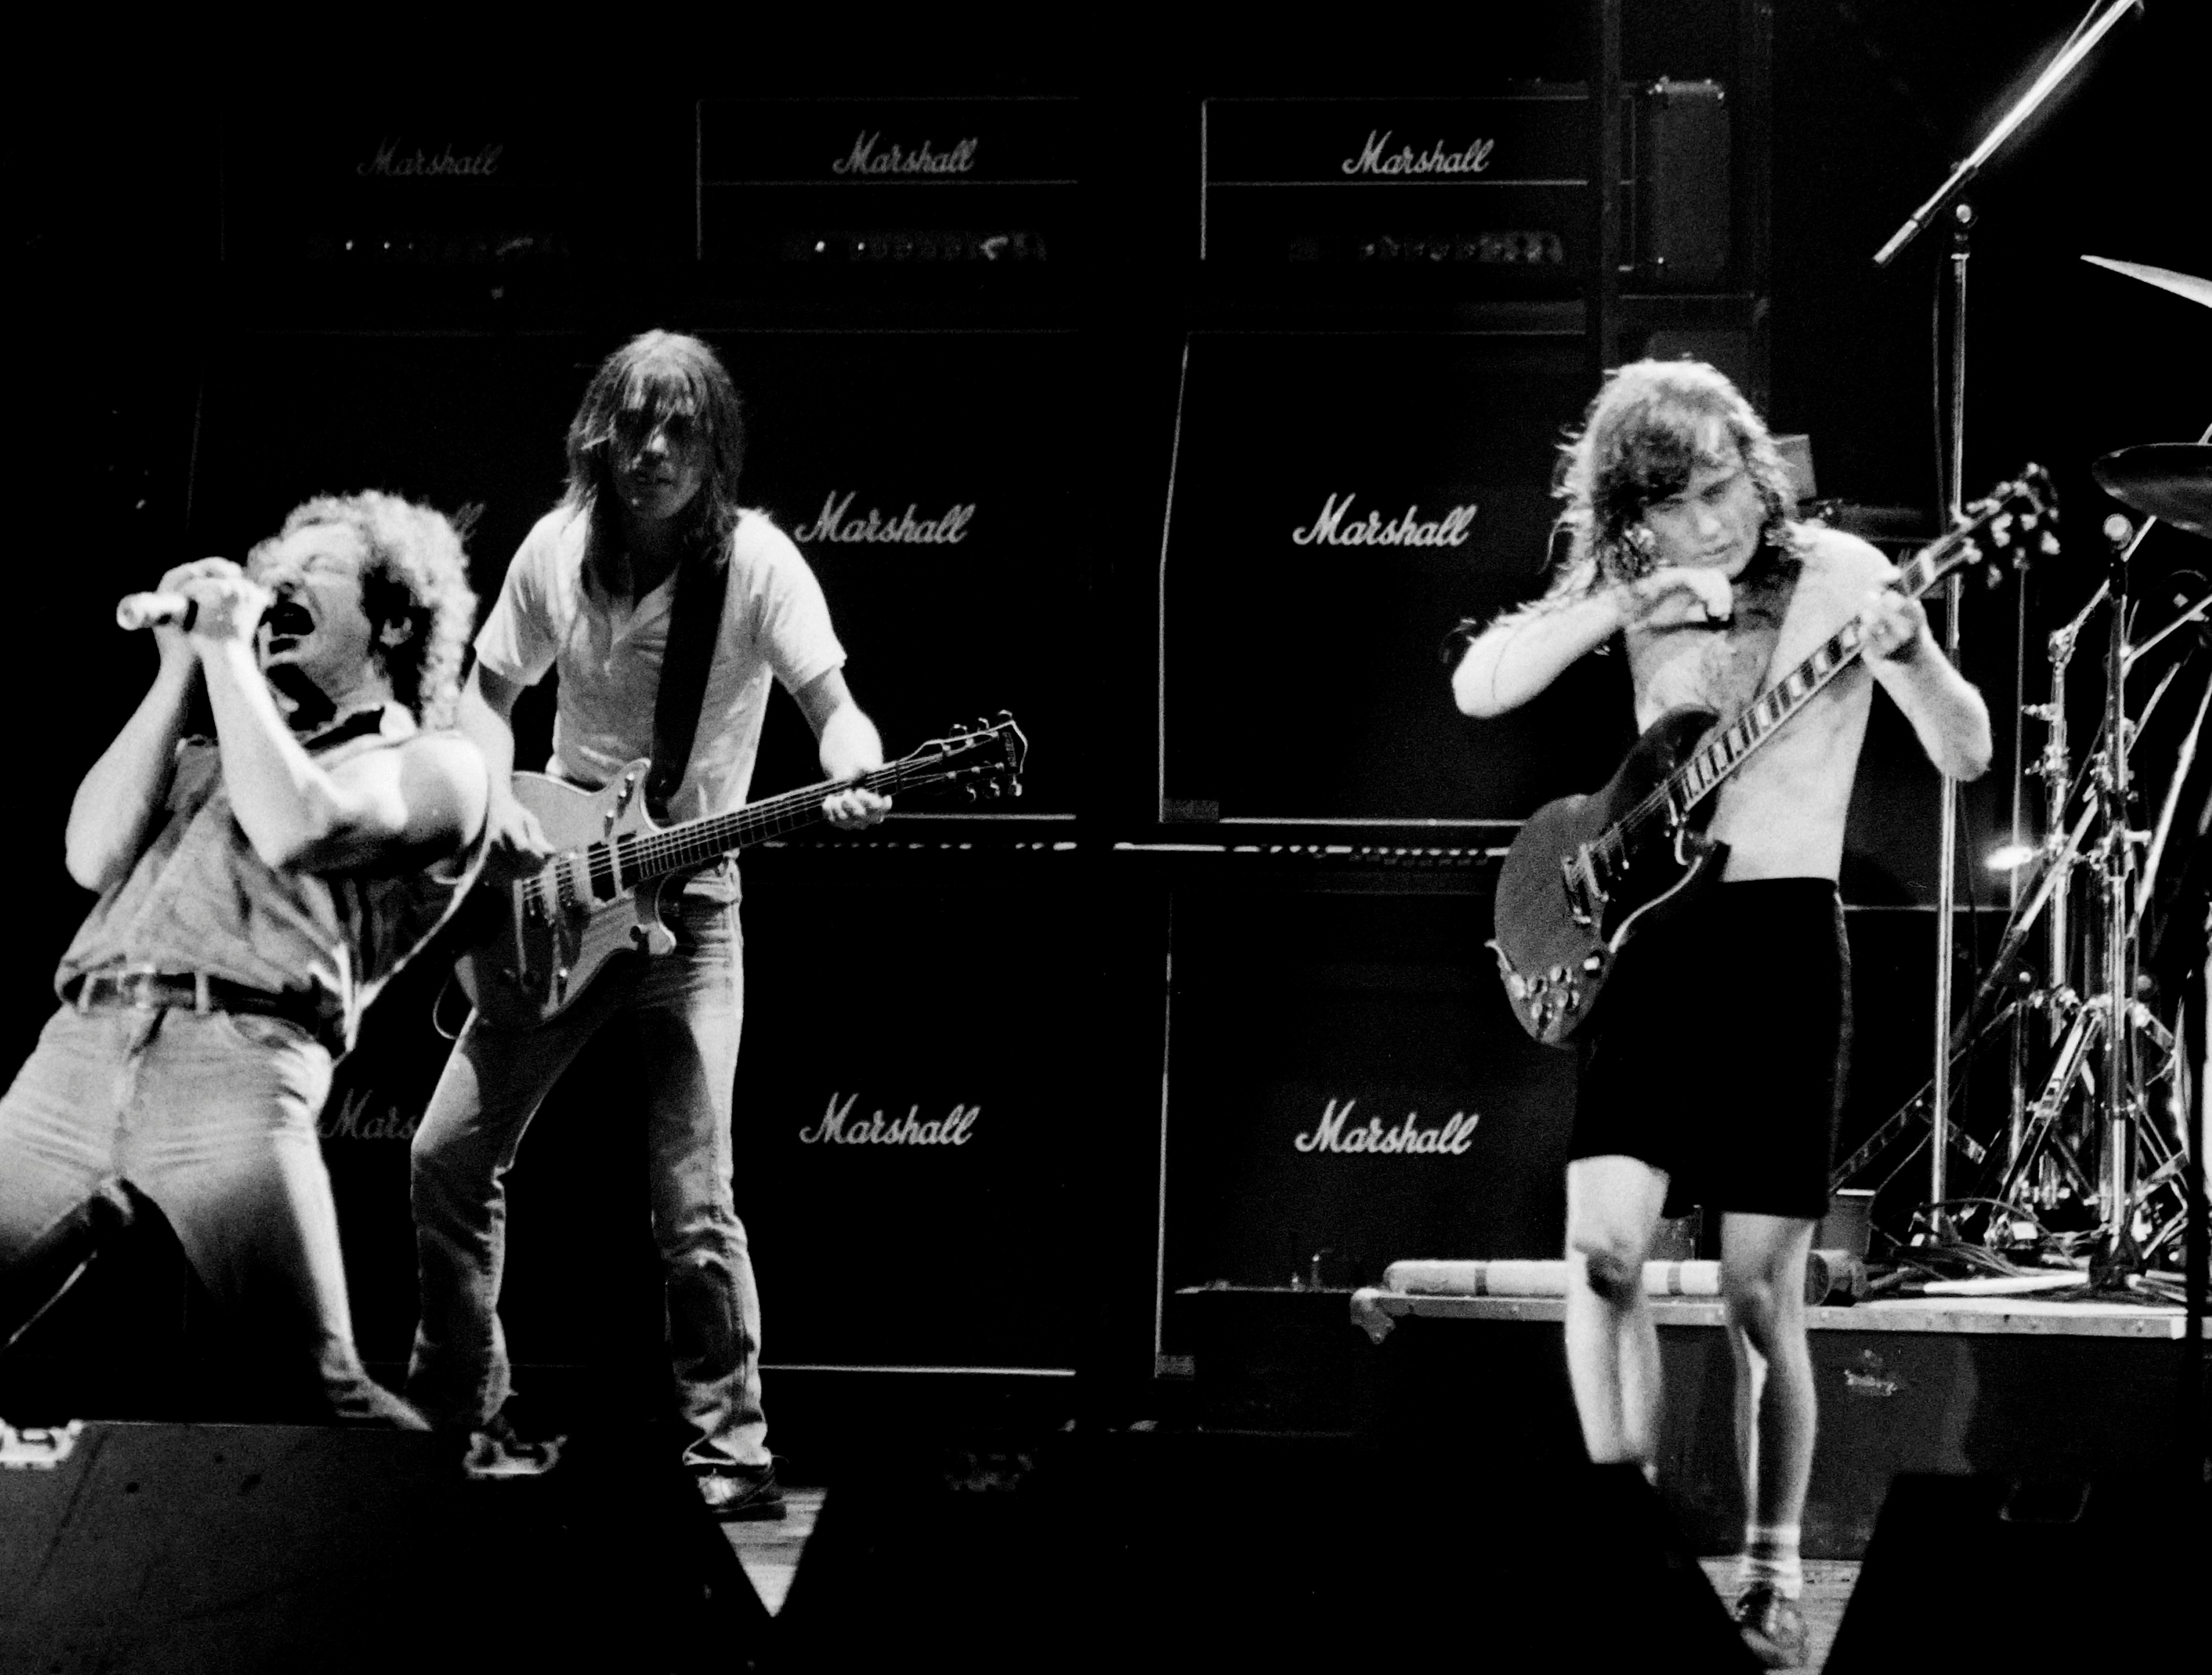 Back in Black — how AC/DC created the definitive hard rock song